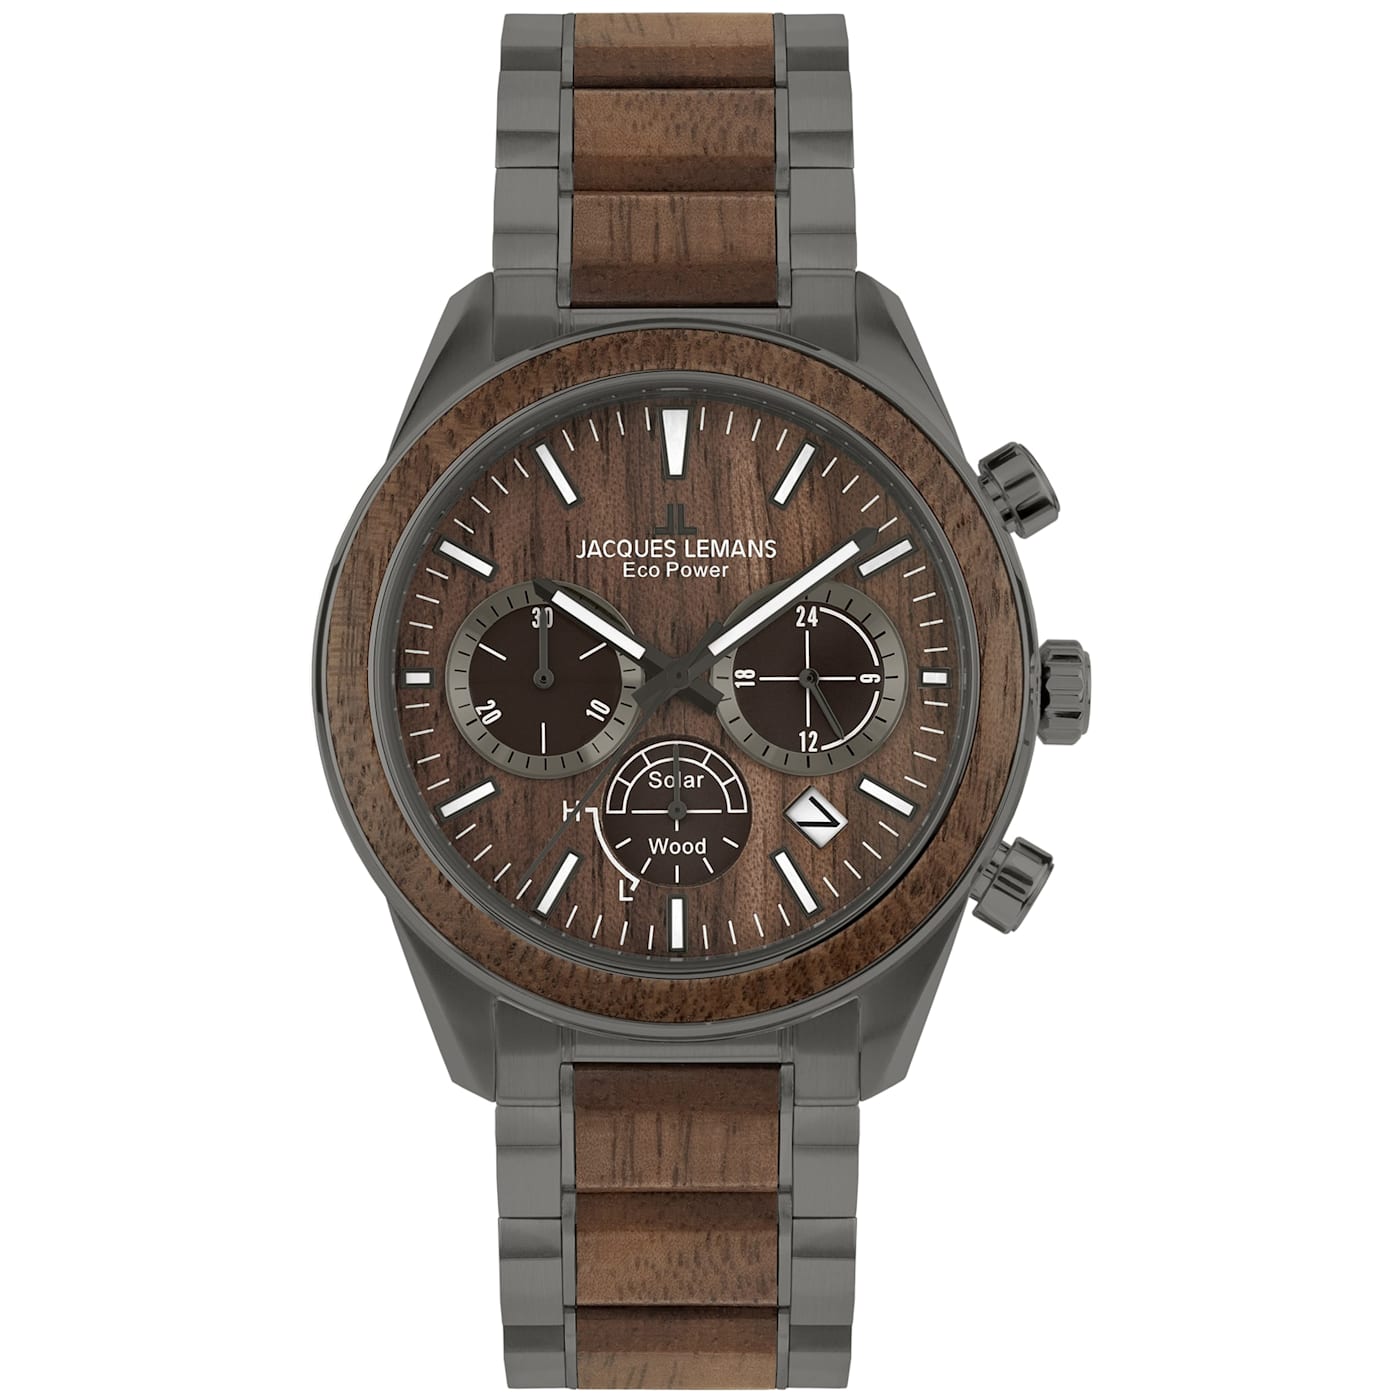 JACQUES LEMANS Eco Power Men's Watch with Stainless Steel/Wood Inlay Strap  Gray, Chronograph 1-2115 - 1BY38A